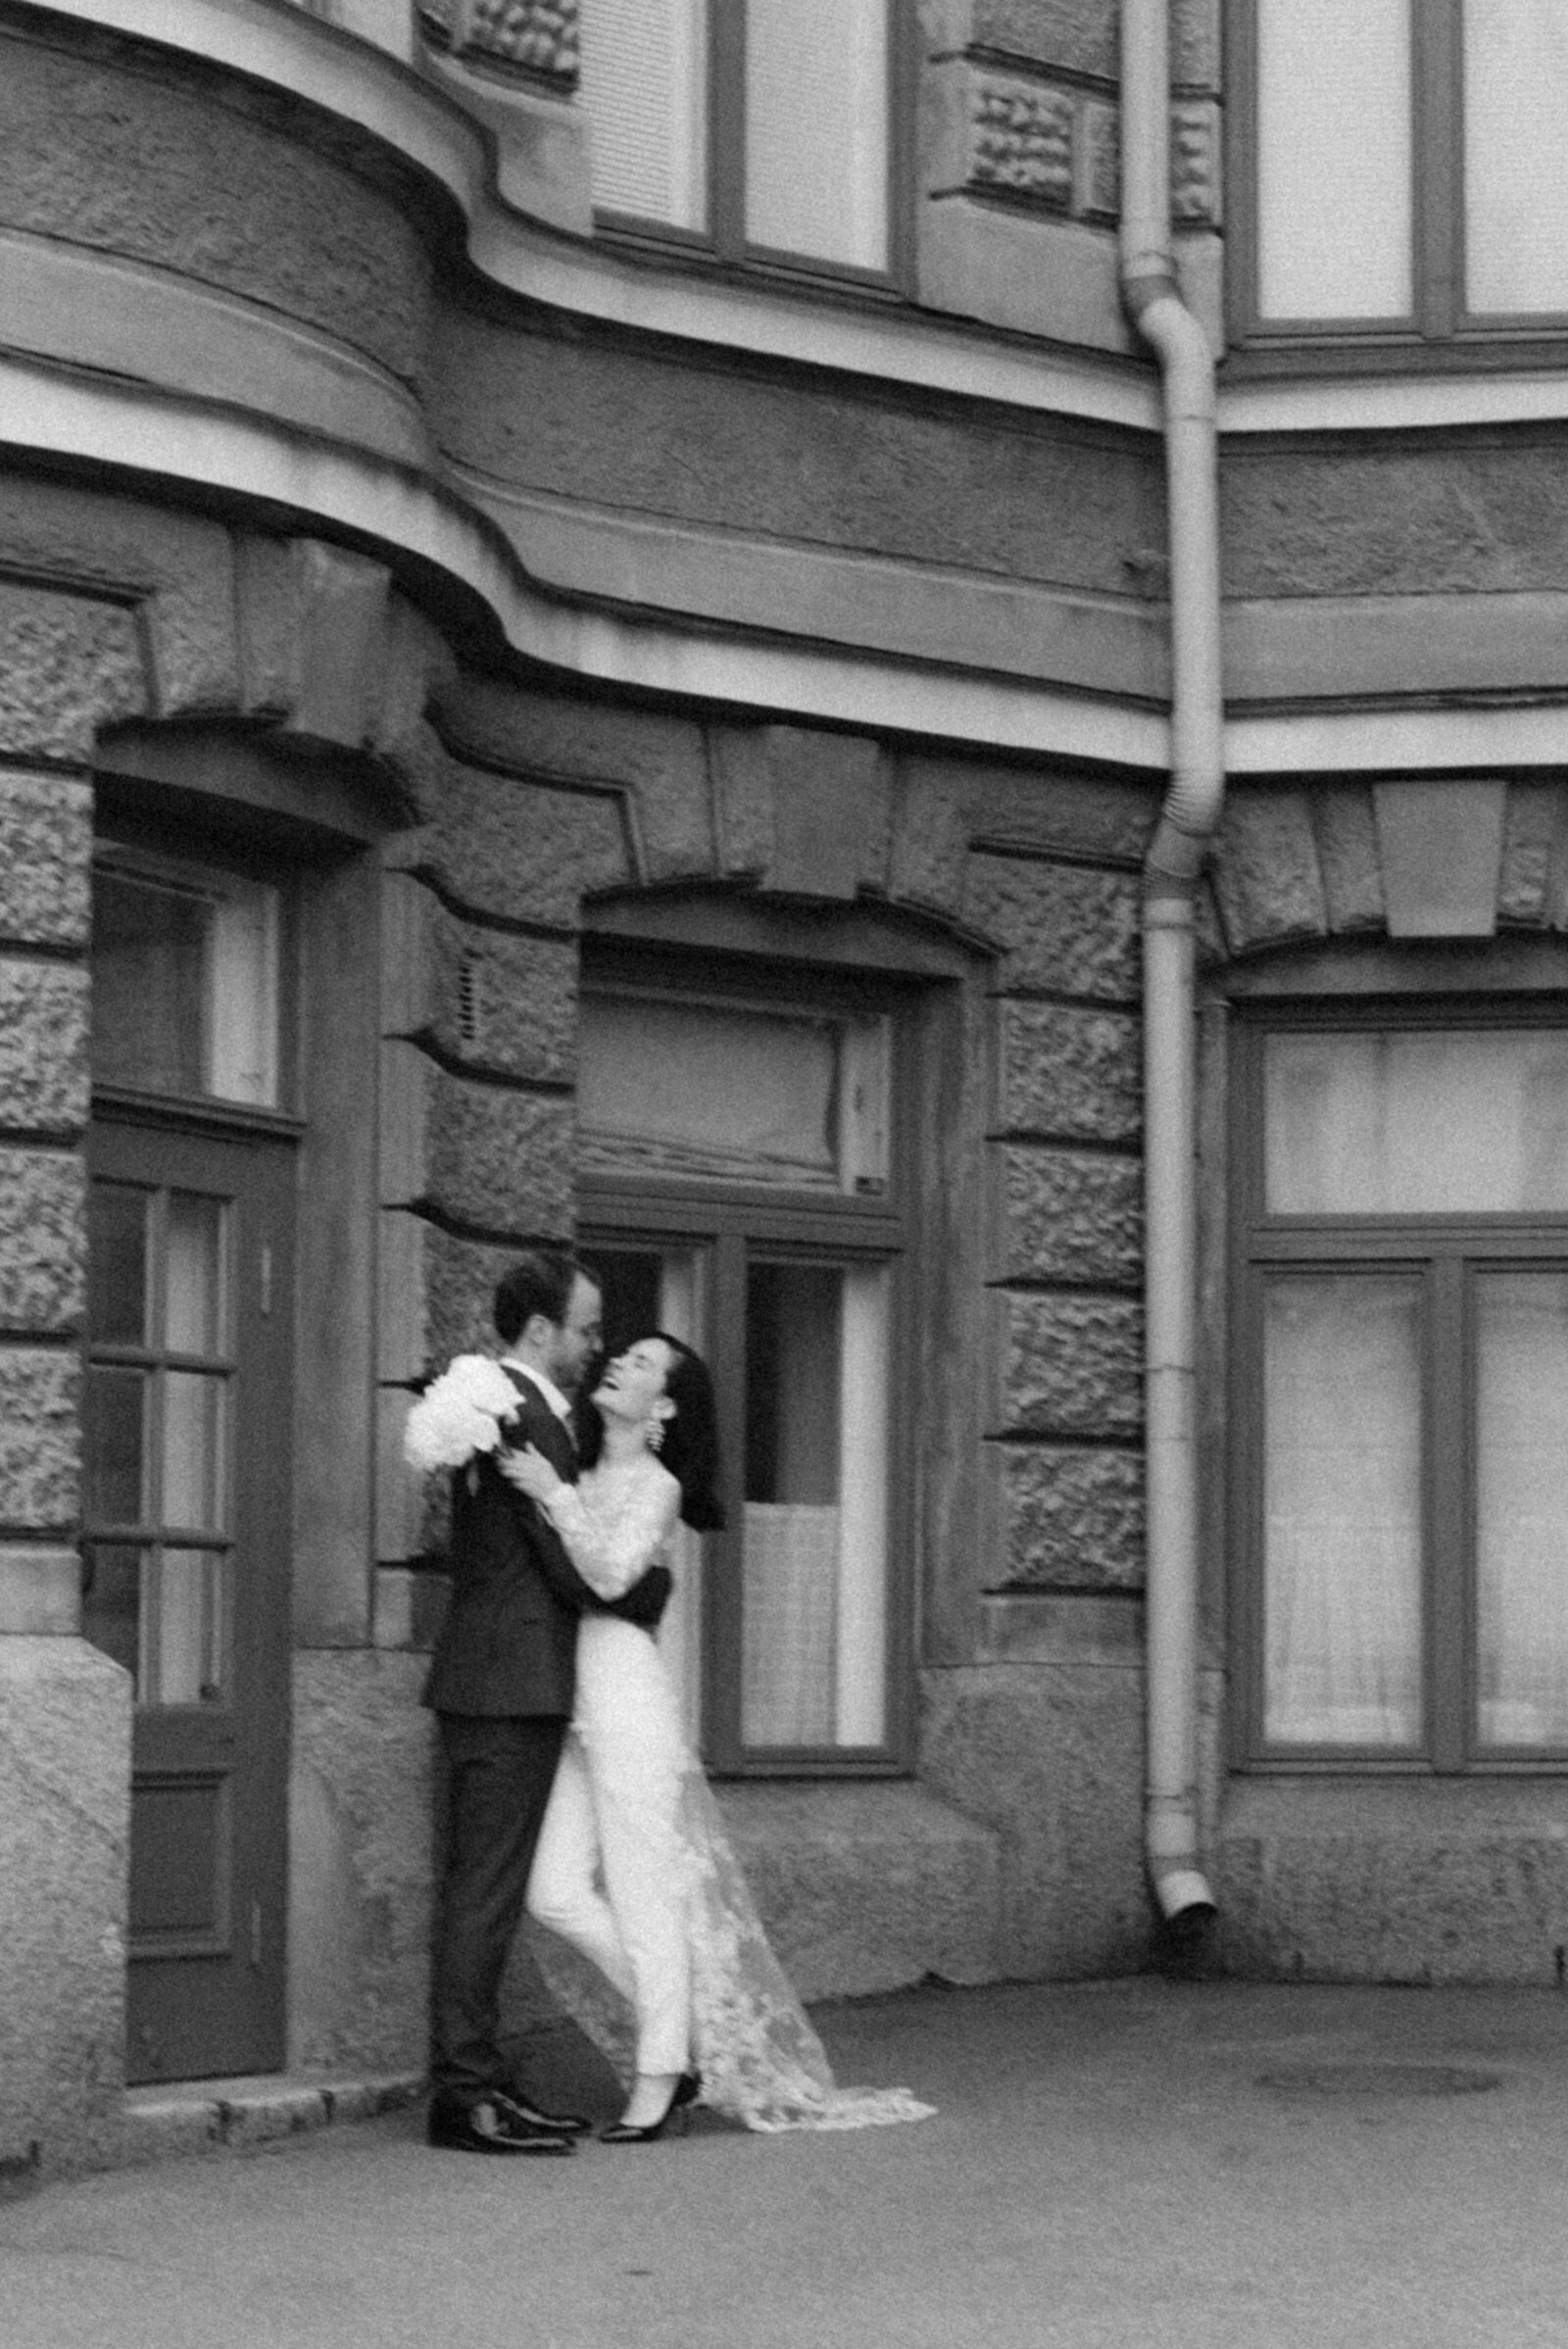 A couple laughing during their wedding photography in front of a bilding in Helsinki. An image captured by a European wedding photographer Hannika Gabrielsson.